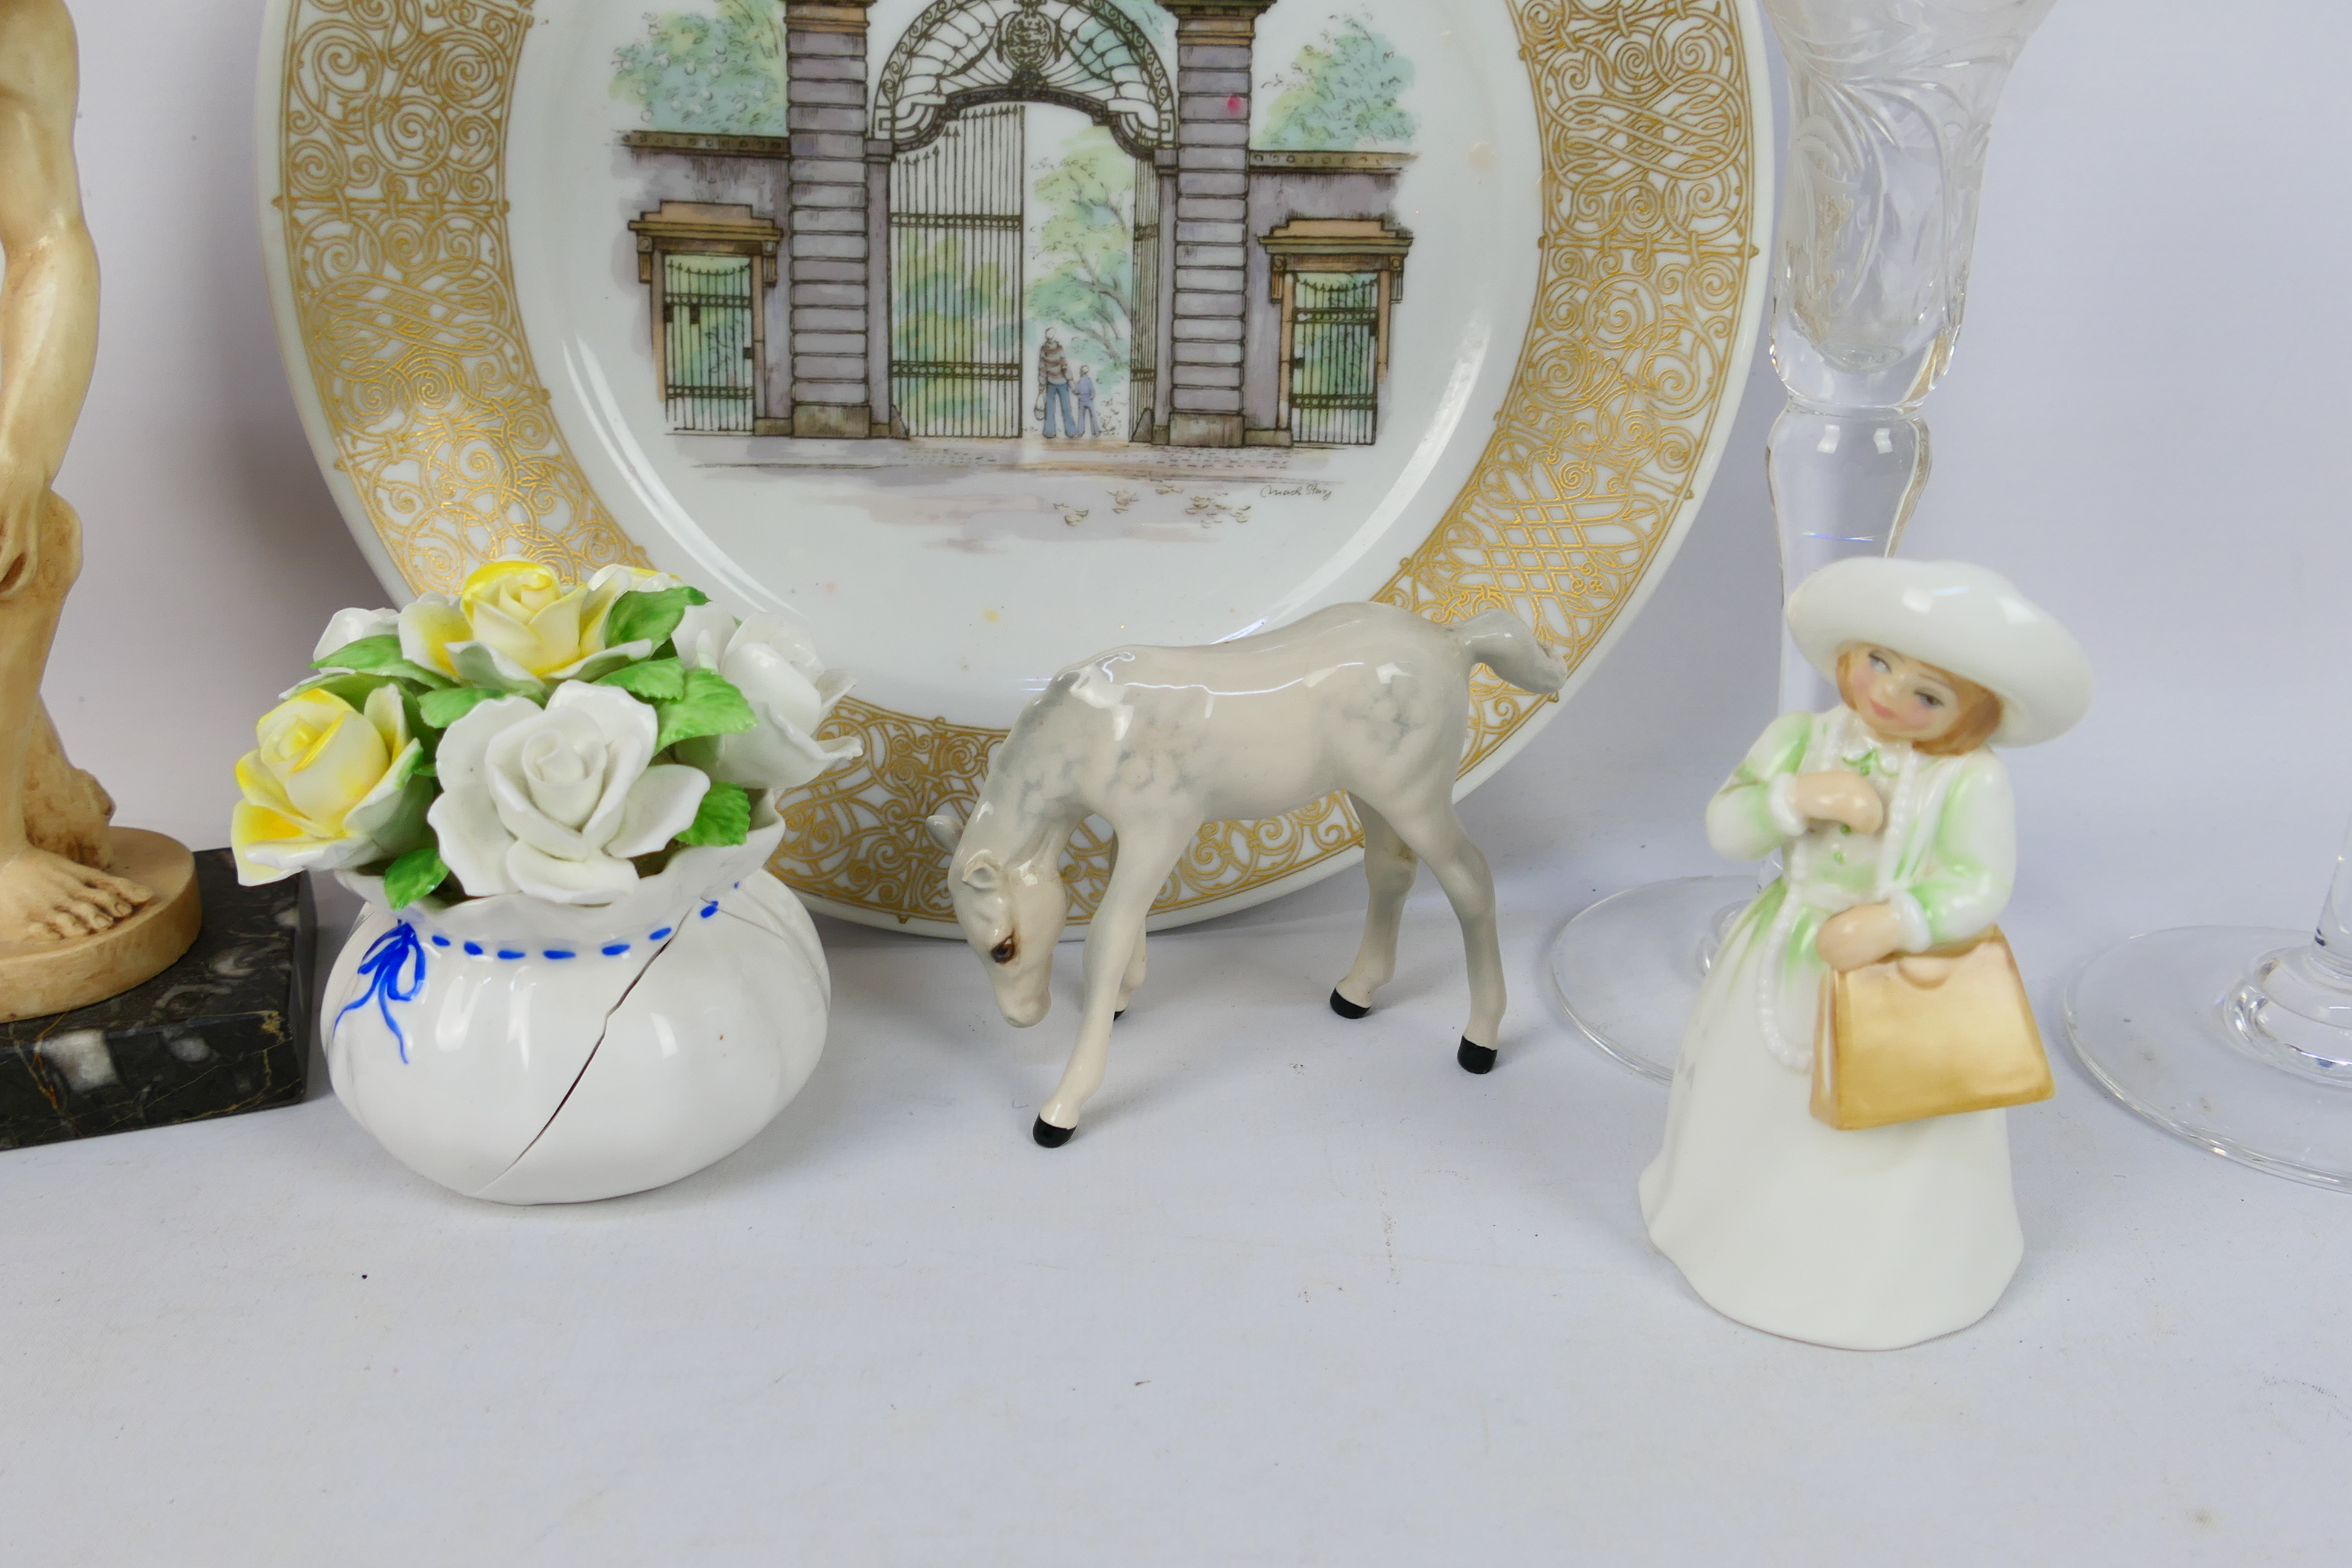 Lot to include a Royal Doulton foal figure, Royal Copenhagen plate, - Image 4 of 6